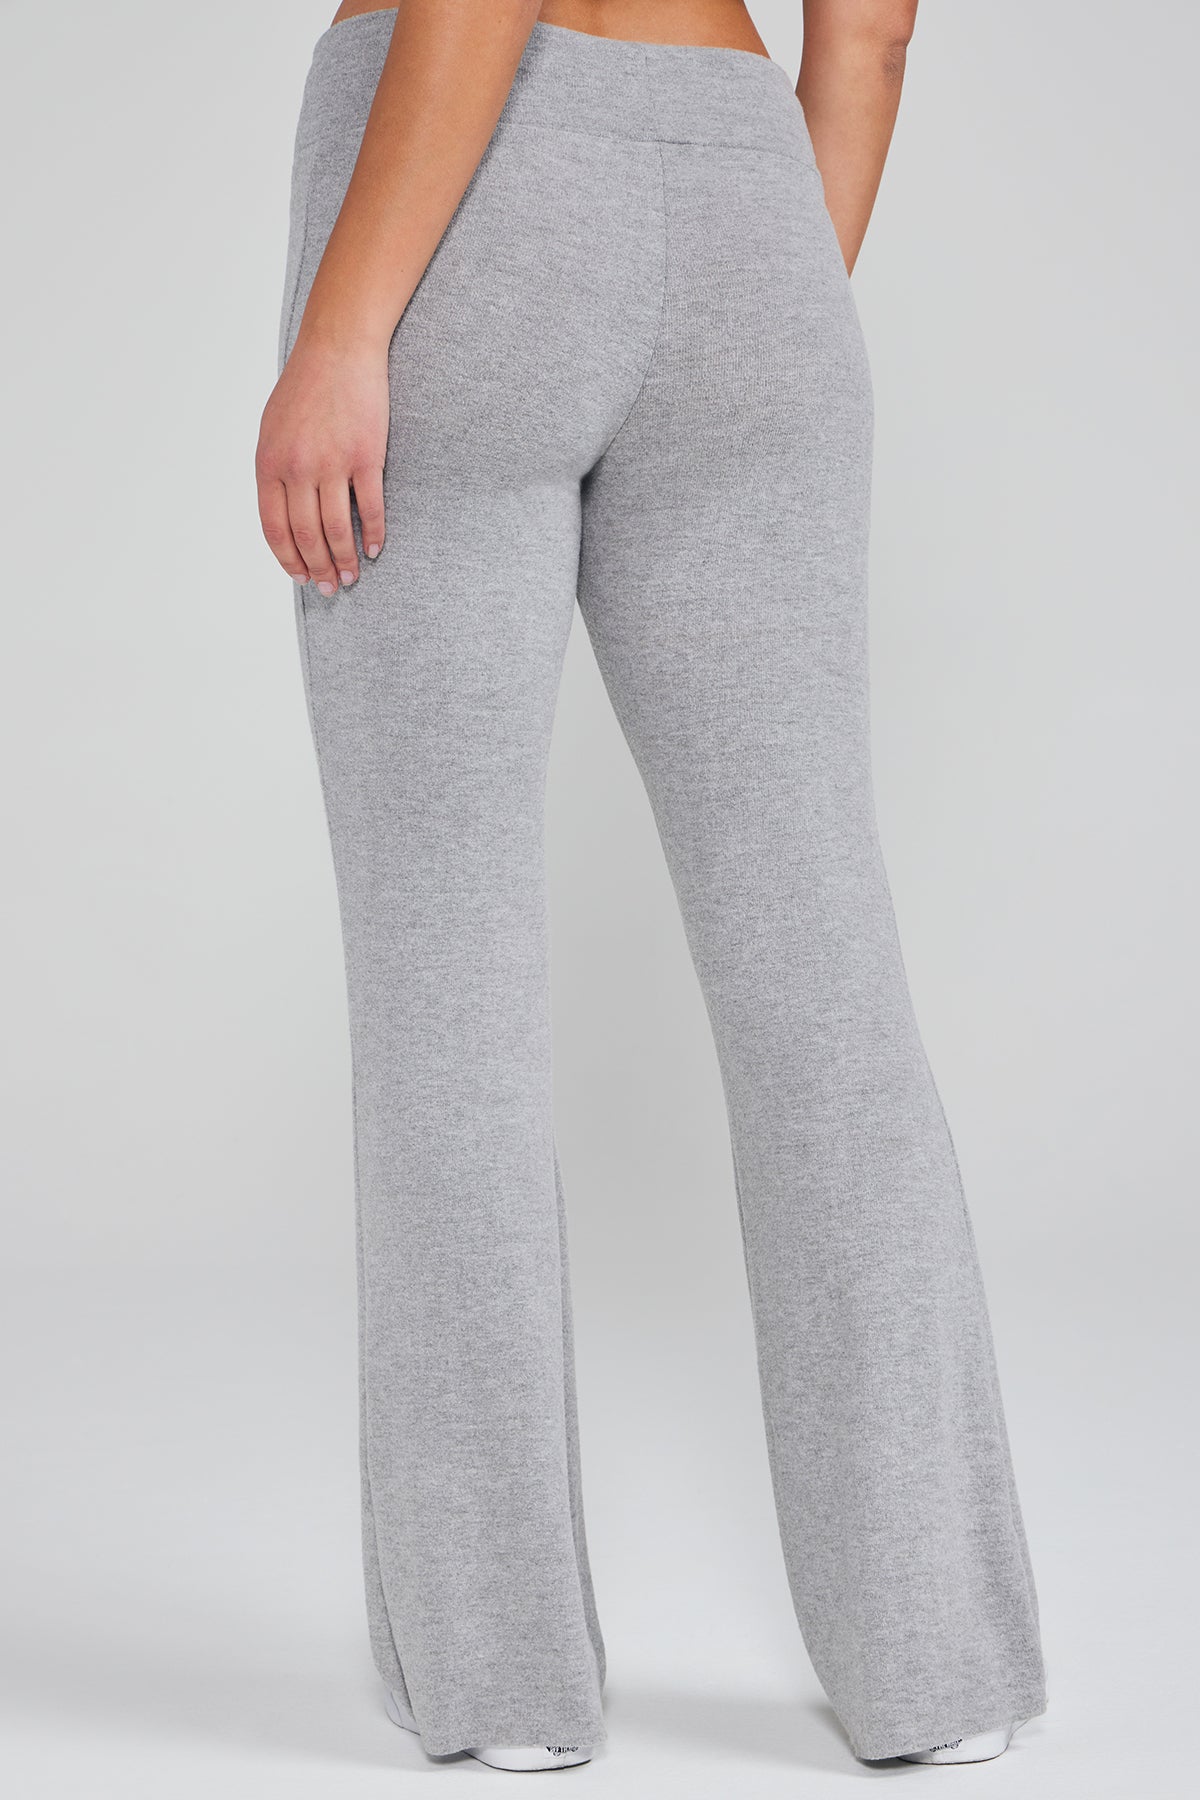 Tennis Club Pants  Heather – Wildfox Couture